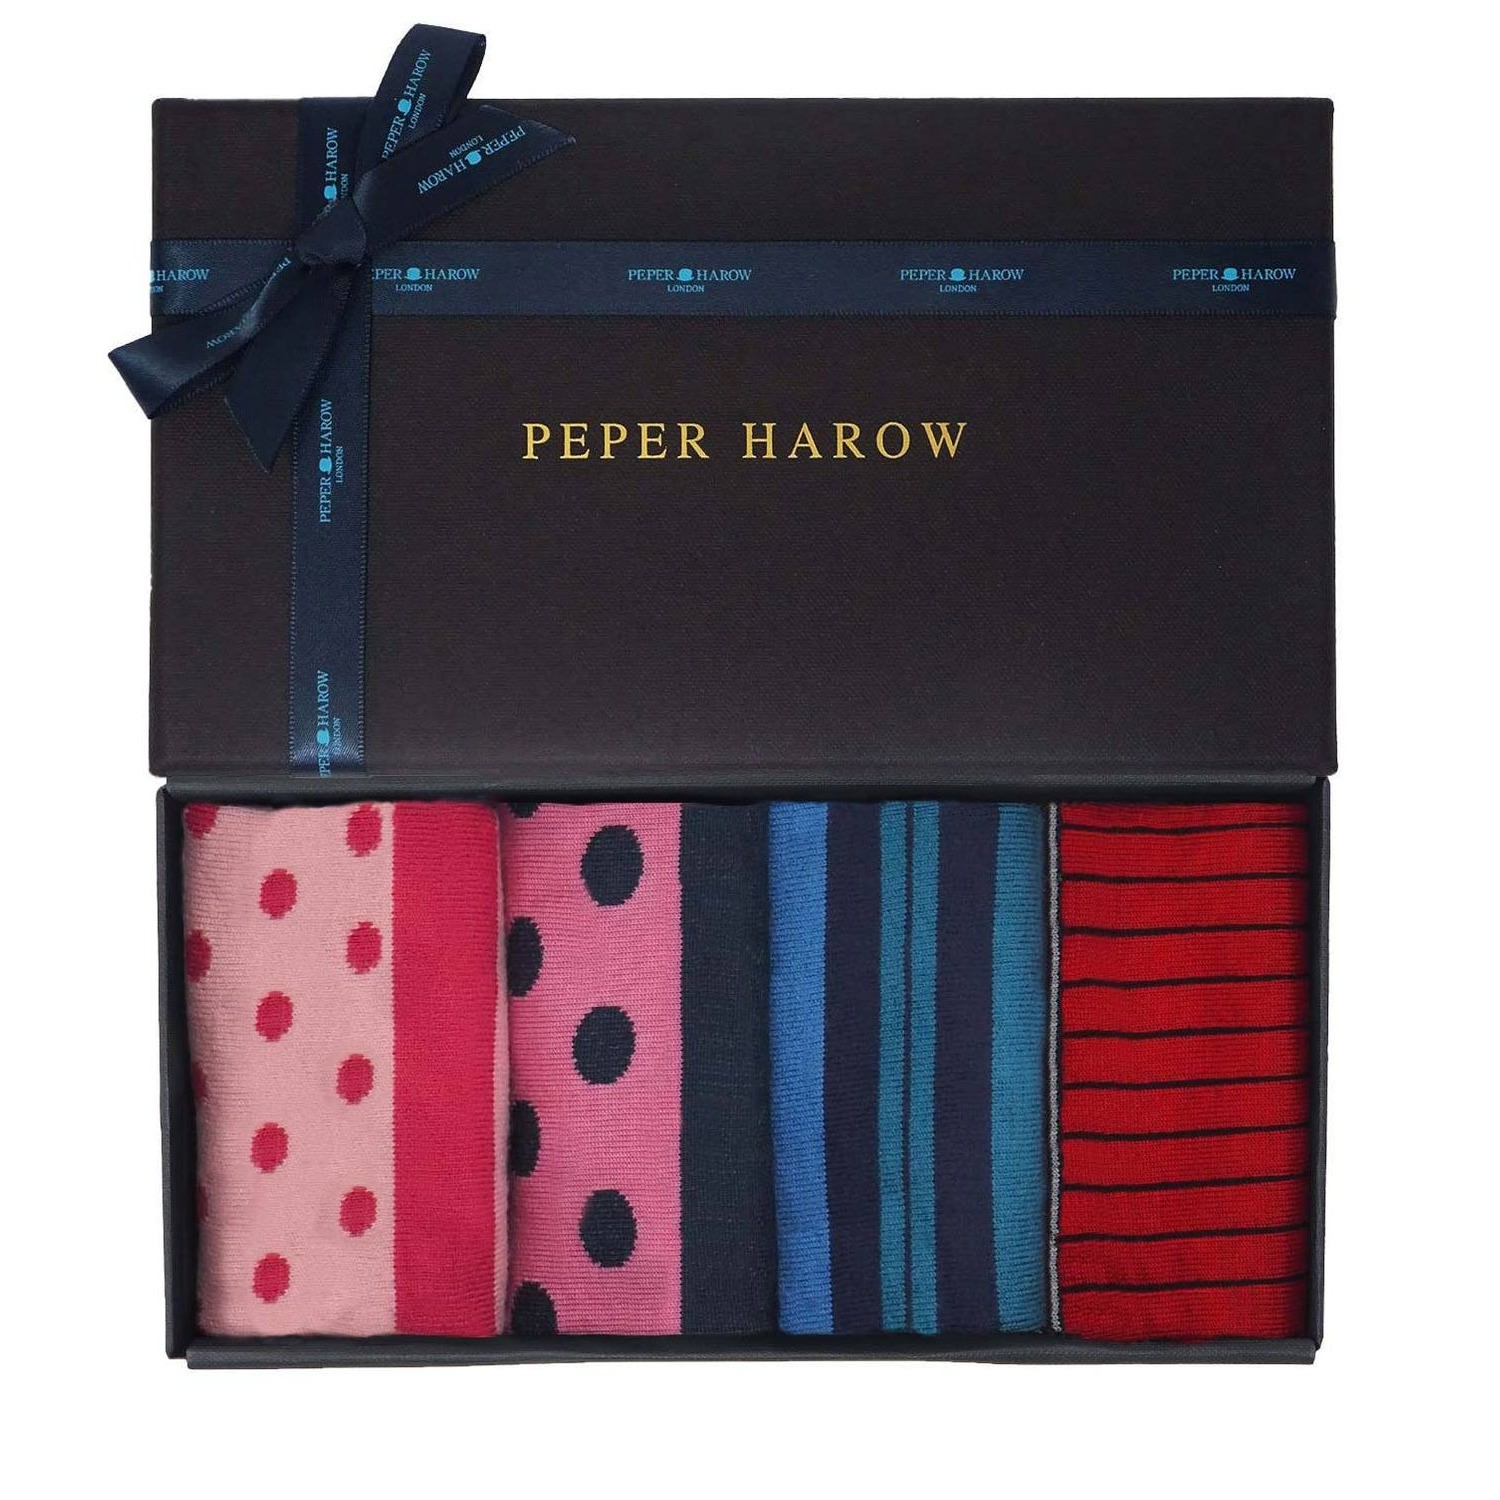 Berries Ladies Gift Box One Size Peper Harow - Made in England